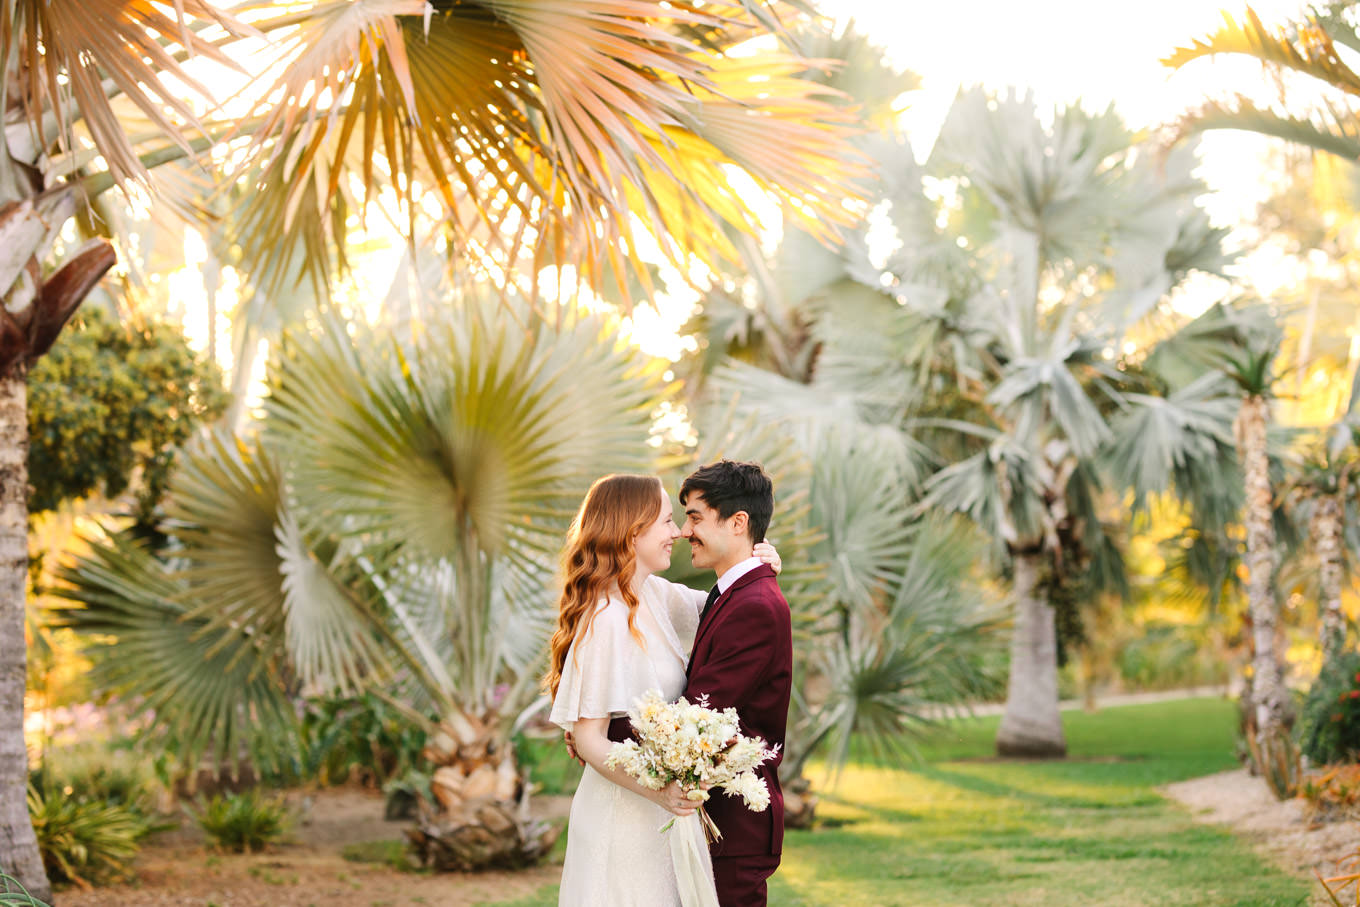 Bride and groom in palm garden | Los Angeles Arboretum Elopement | Colorful and elevated wedding photography for fun-loving couples in Southern California | #LosAngelesElopement #elopement #LAarboretum #LAskyline #elopementphotos   Source: Mary Costa Photography | Los Angeles